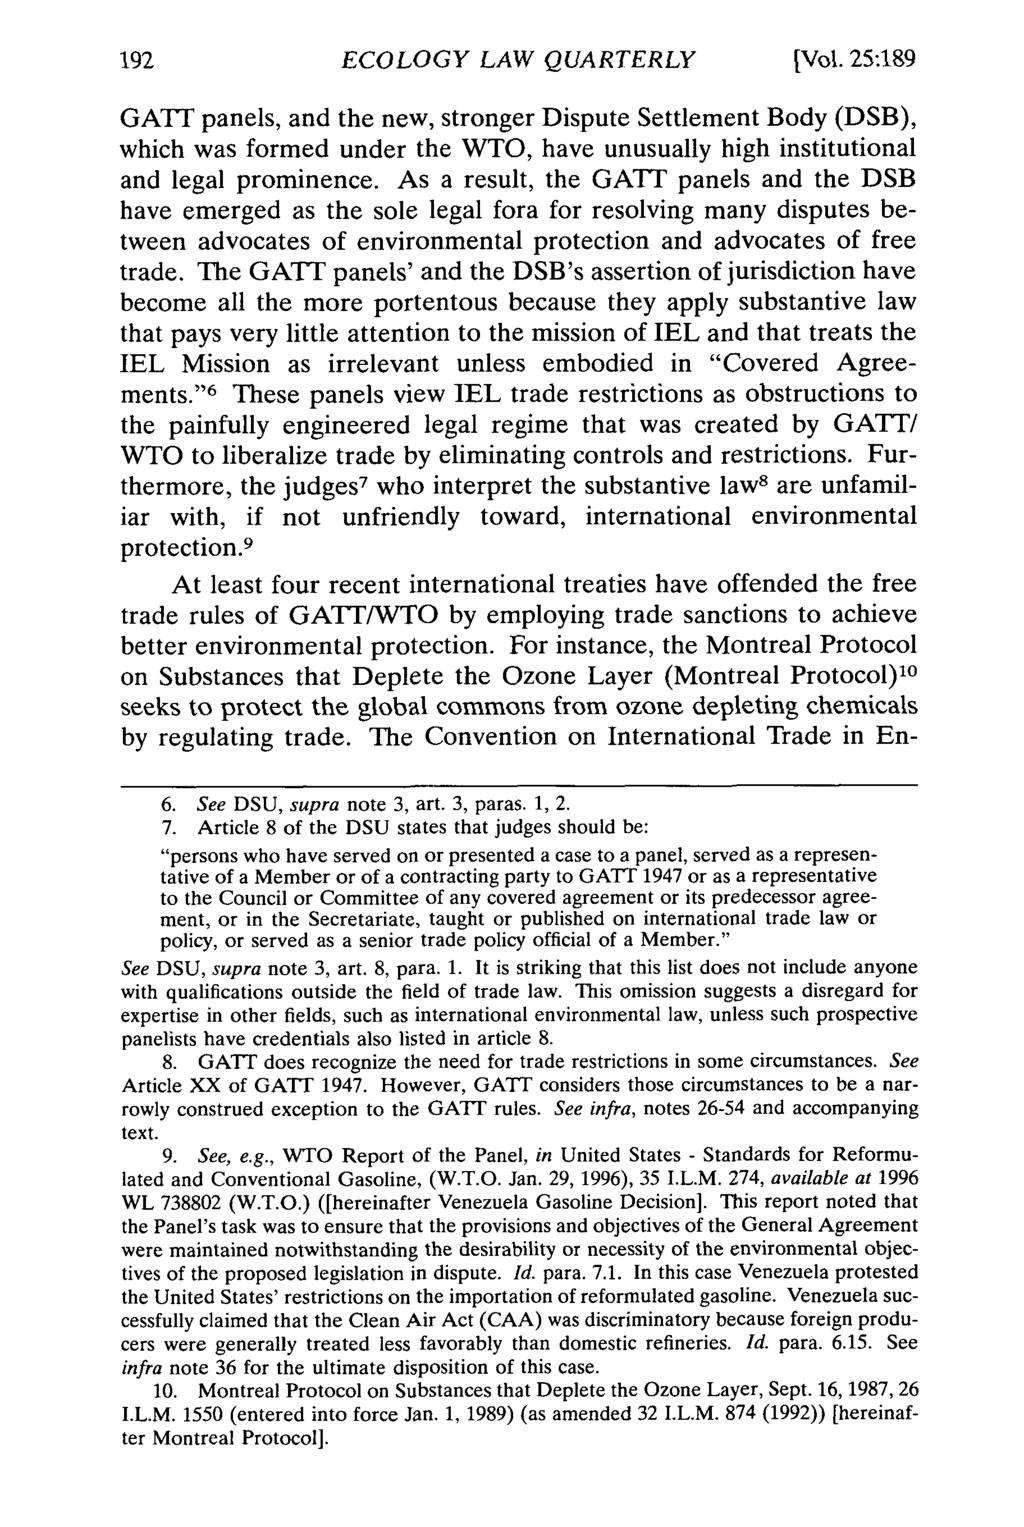 ECOLOGY LAW QUARTERLY [Vol. 25:19 GATT panels, and the new, stronger Dispute Settlement Body (DSB), which was formed under the WTO, have unusually high institutional and legal prominence.